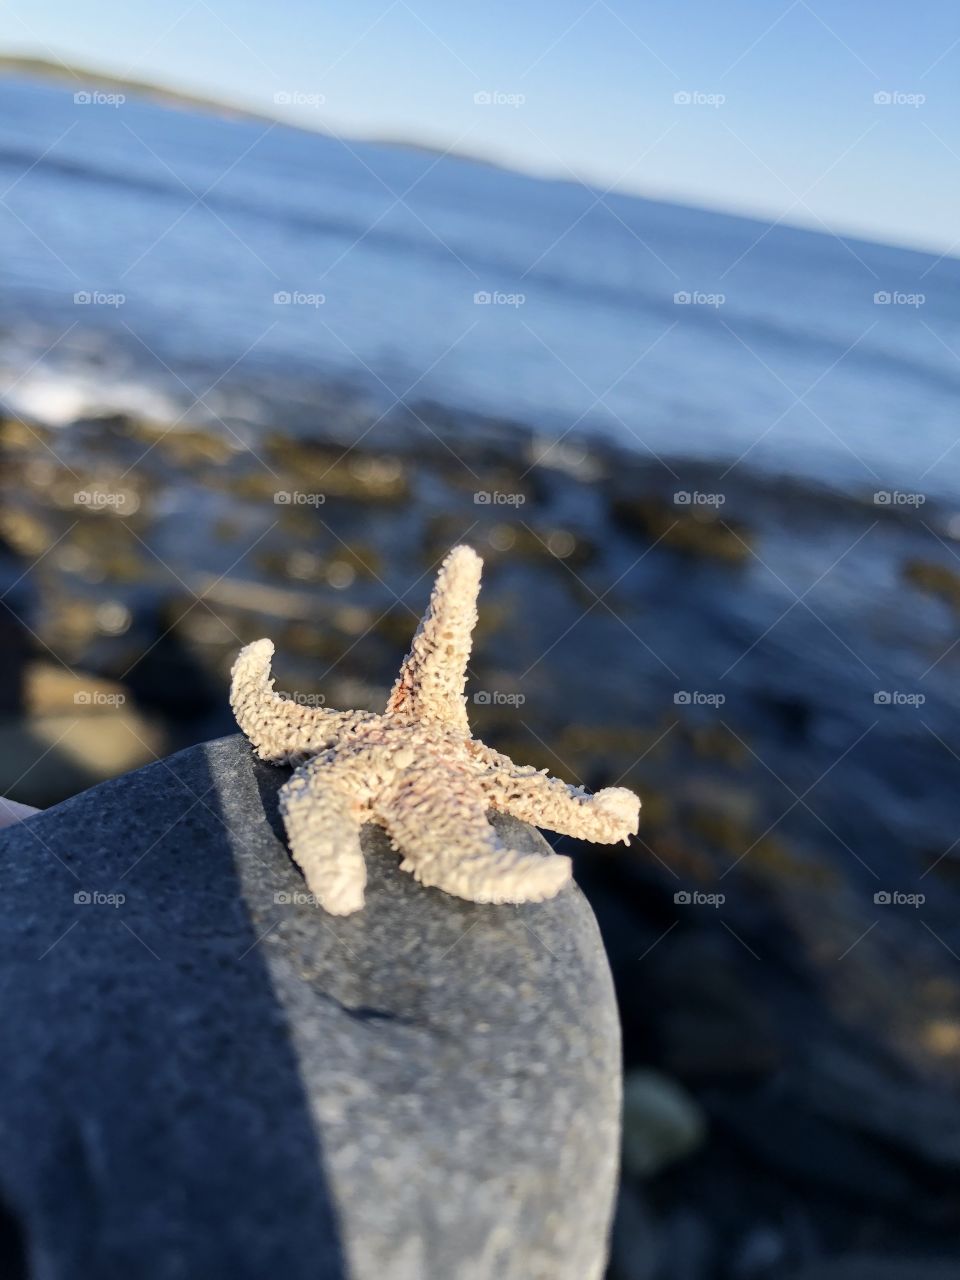 Beautifully shown how the cycle of the life of a starfish is and how it may end